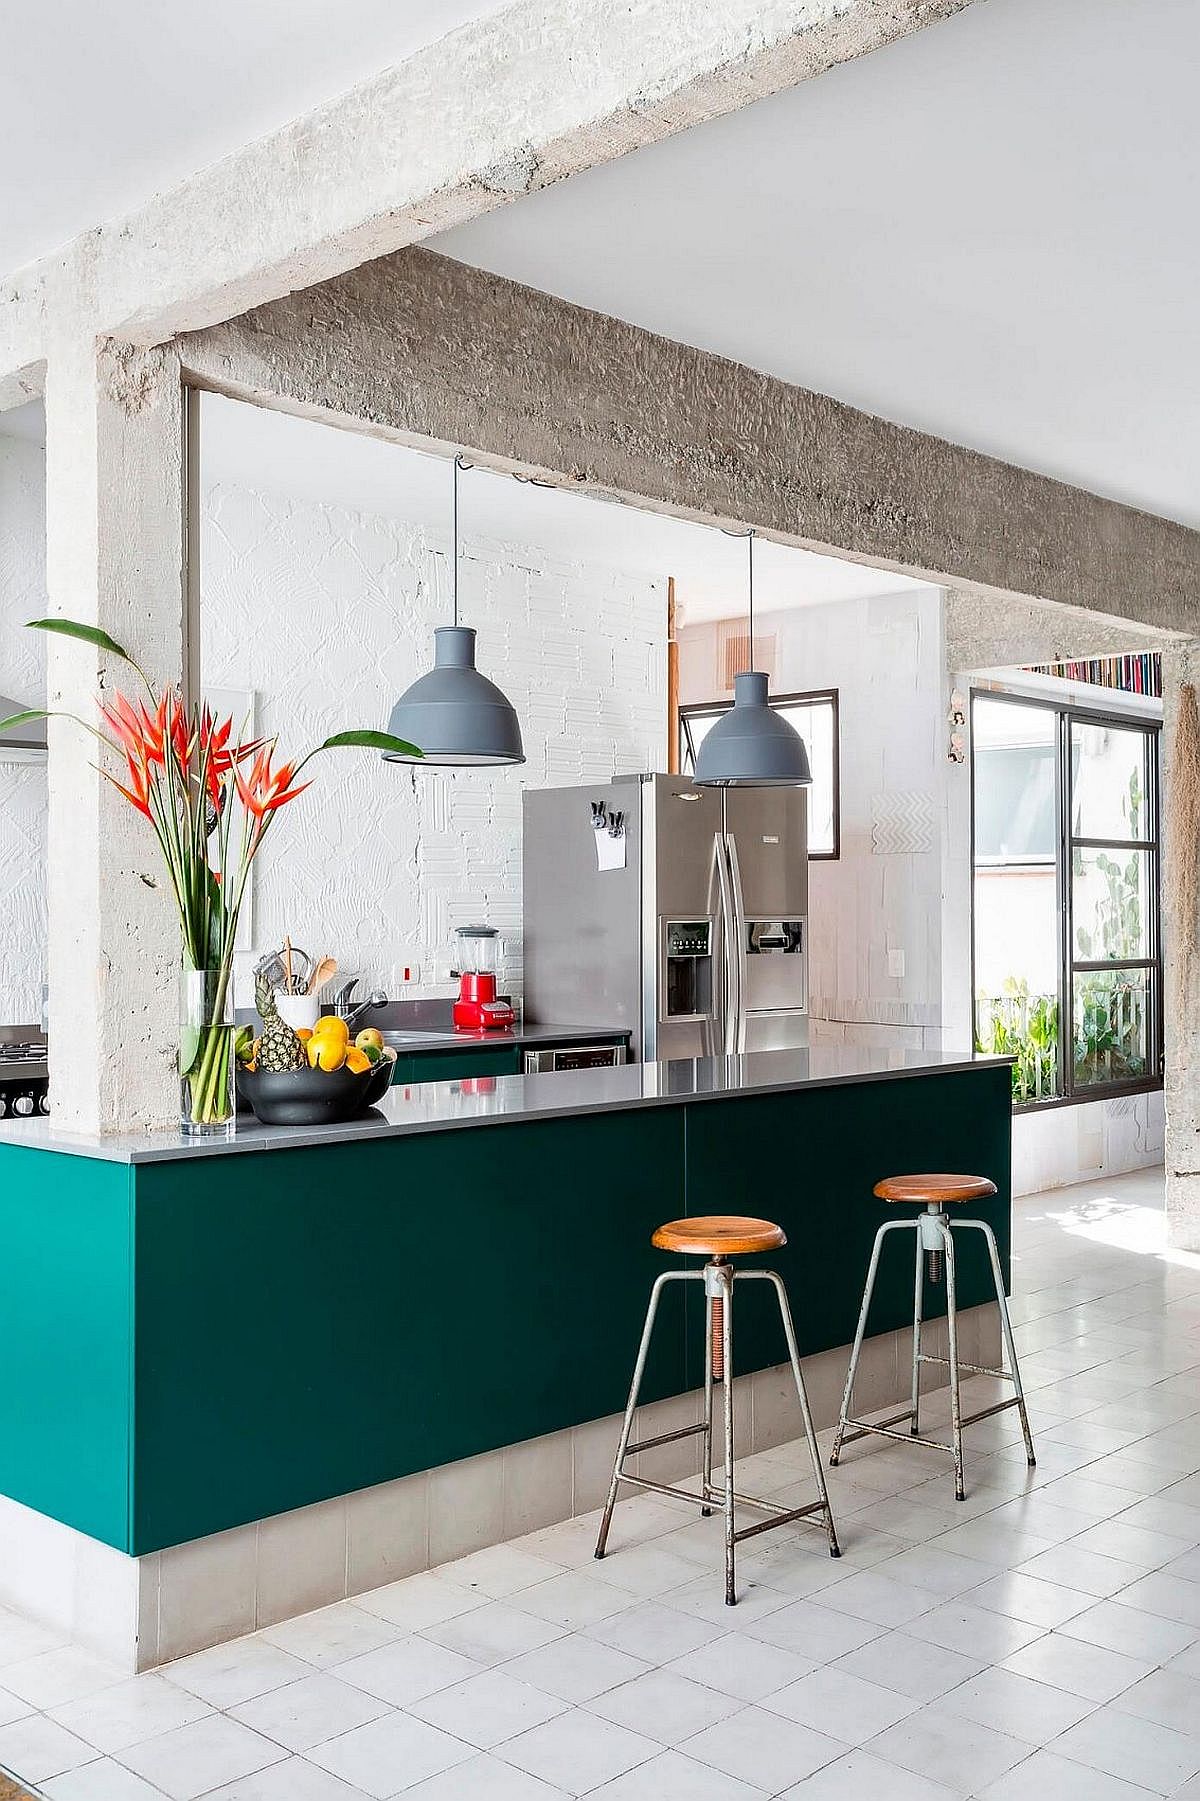 Exquisite-kitchen-island-in-Teal-inside-sophisticated-Sao-Paulo-apartment